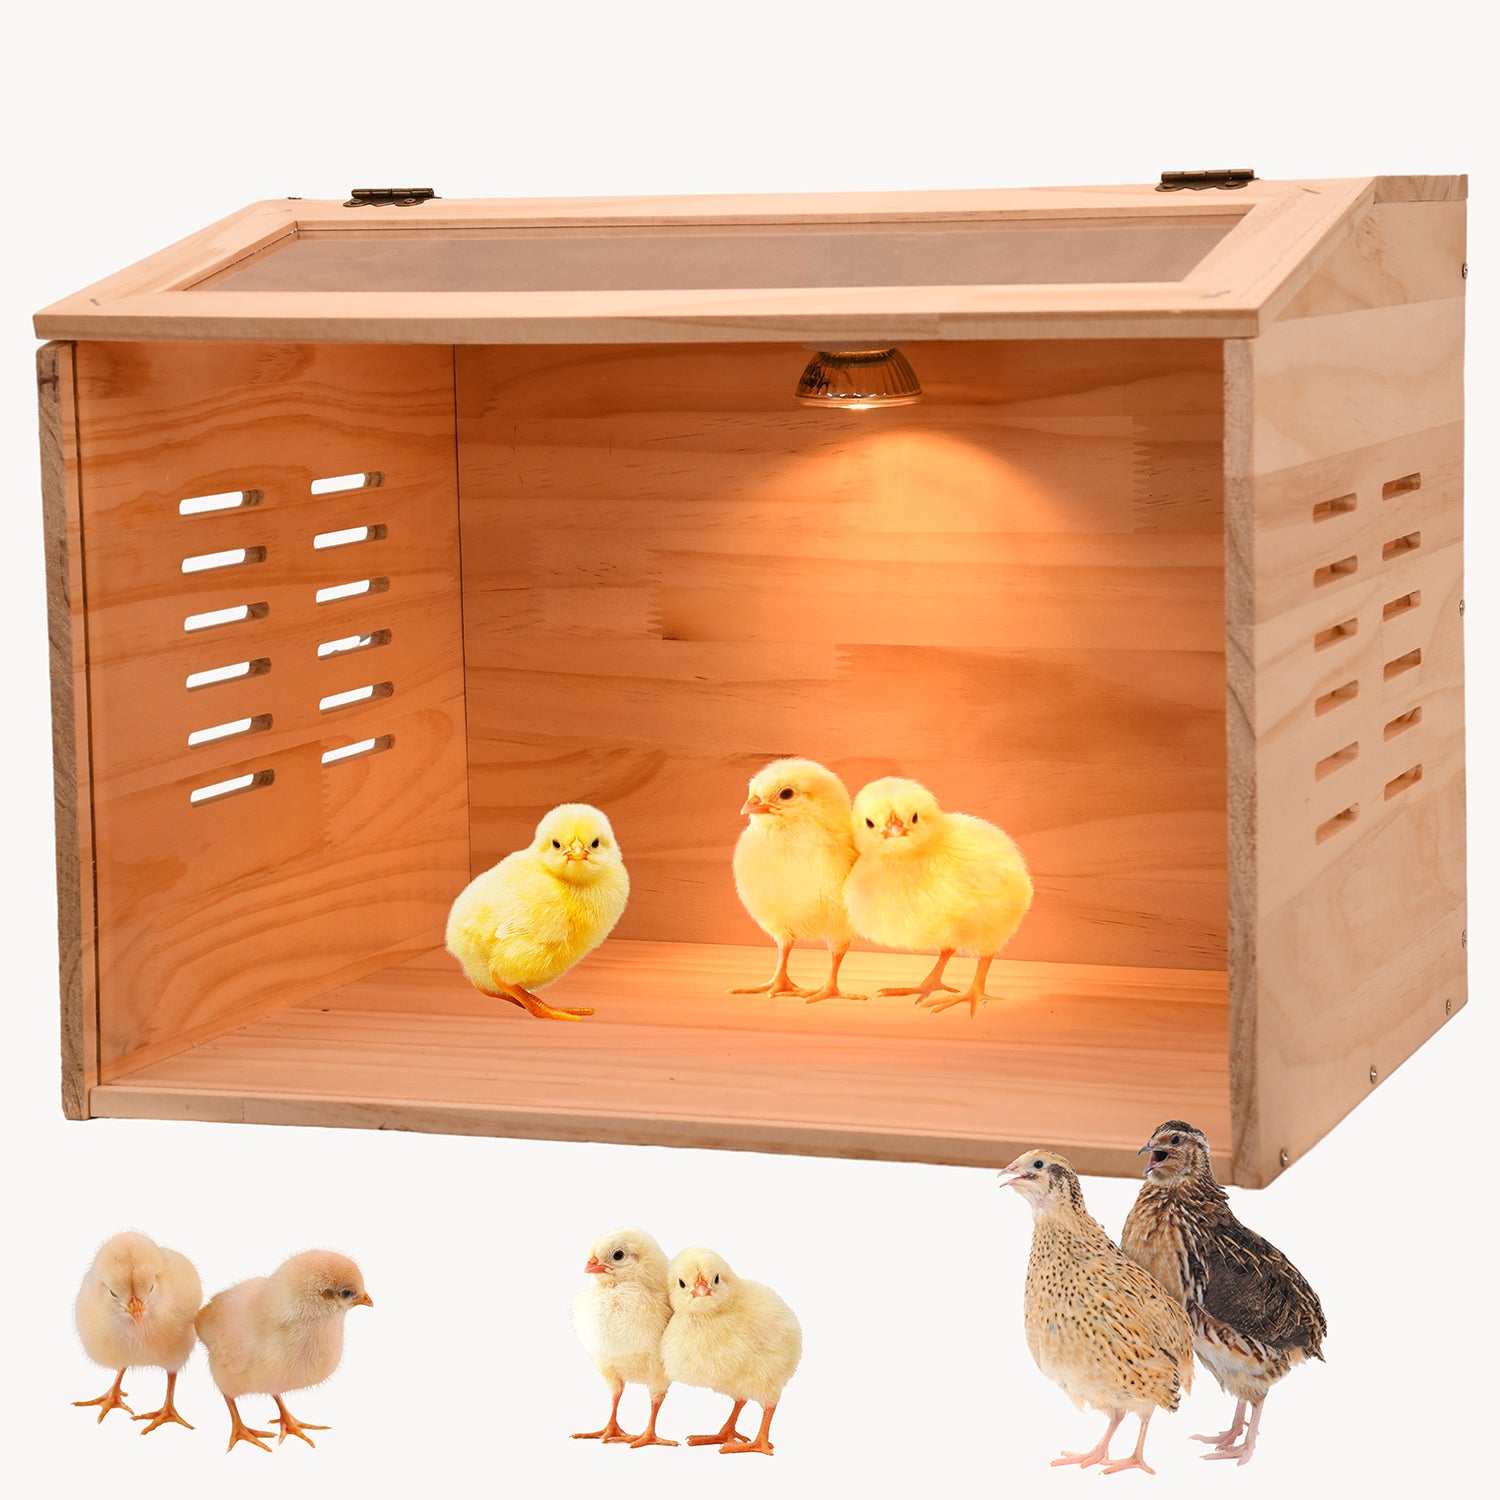 chick brooder box. 5-12 chicken brooder heater. pine wood material. poultry brooder box with heater